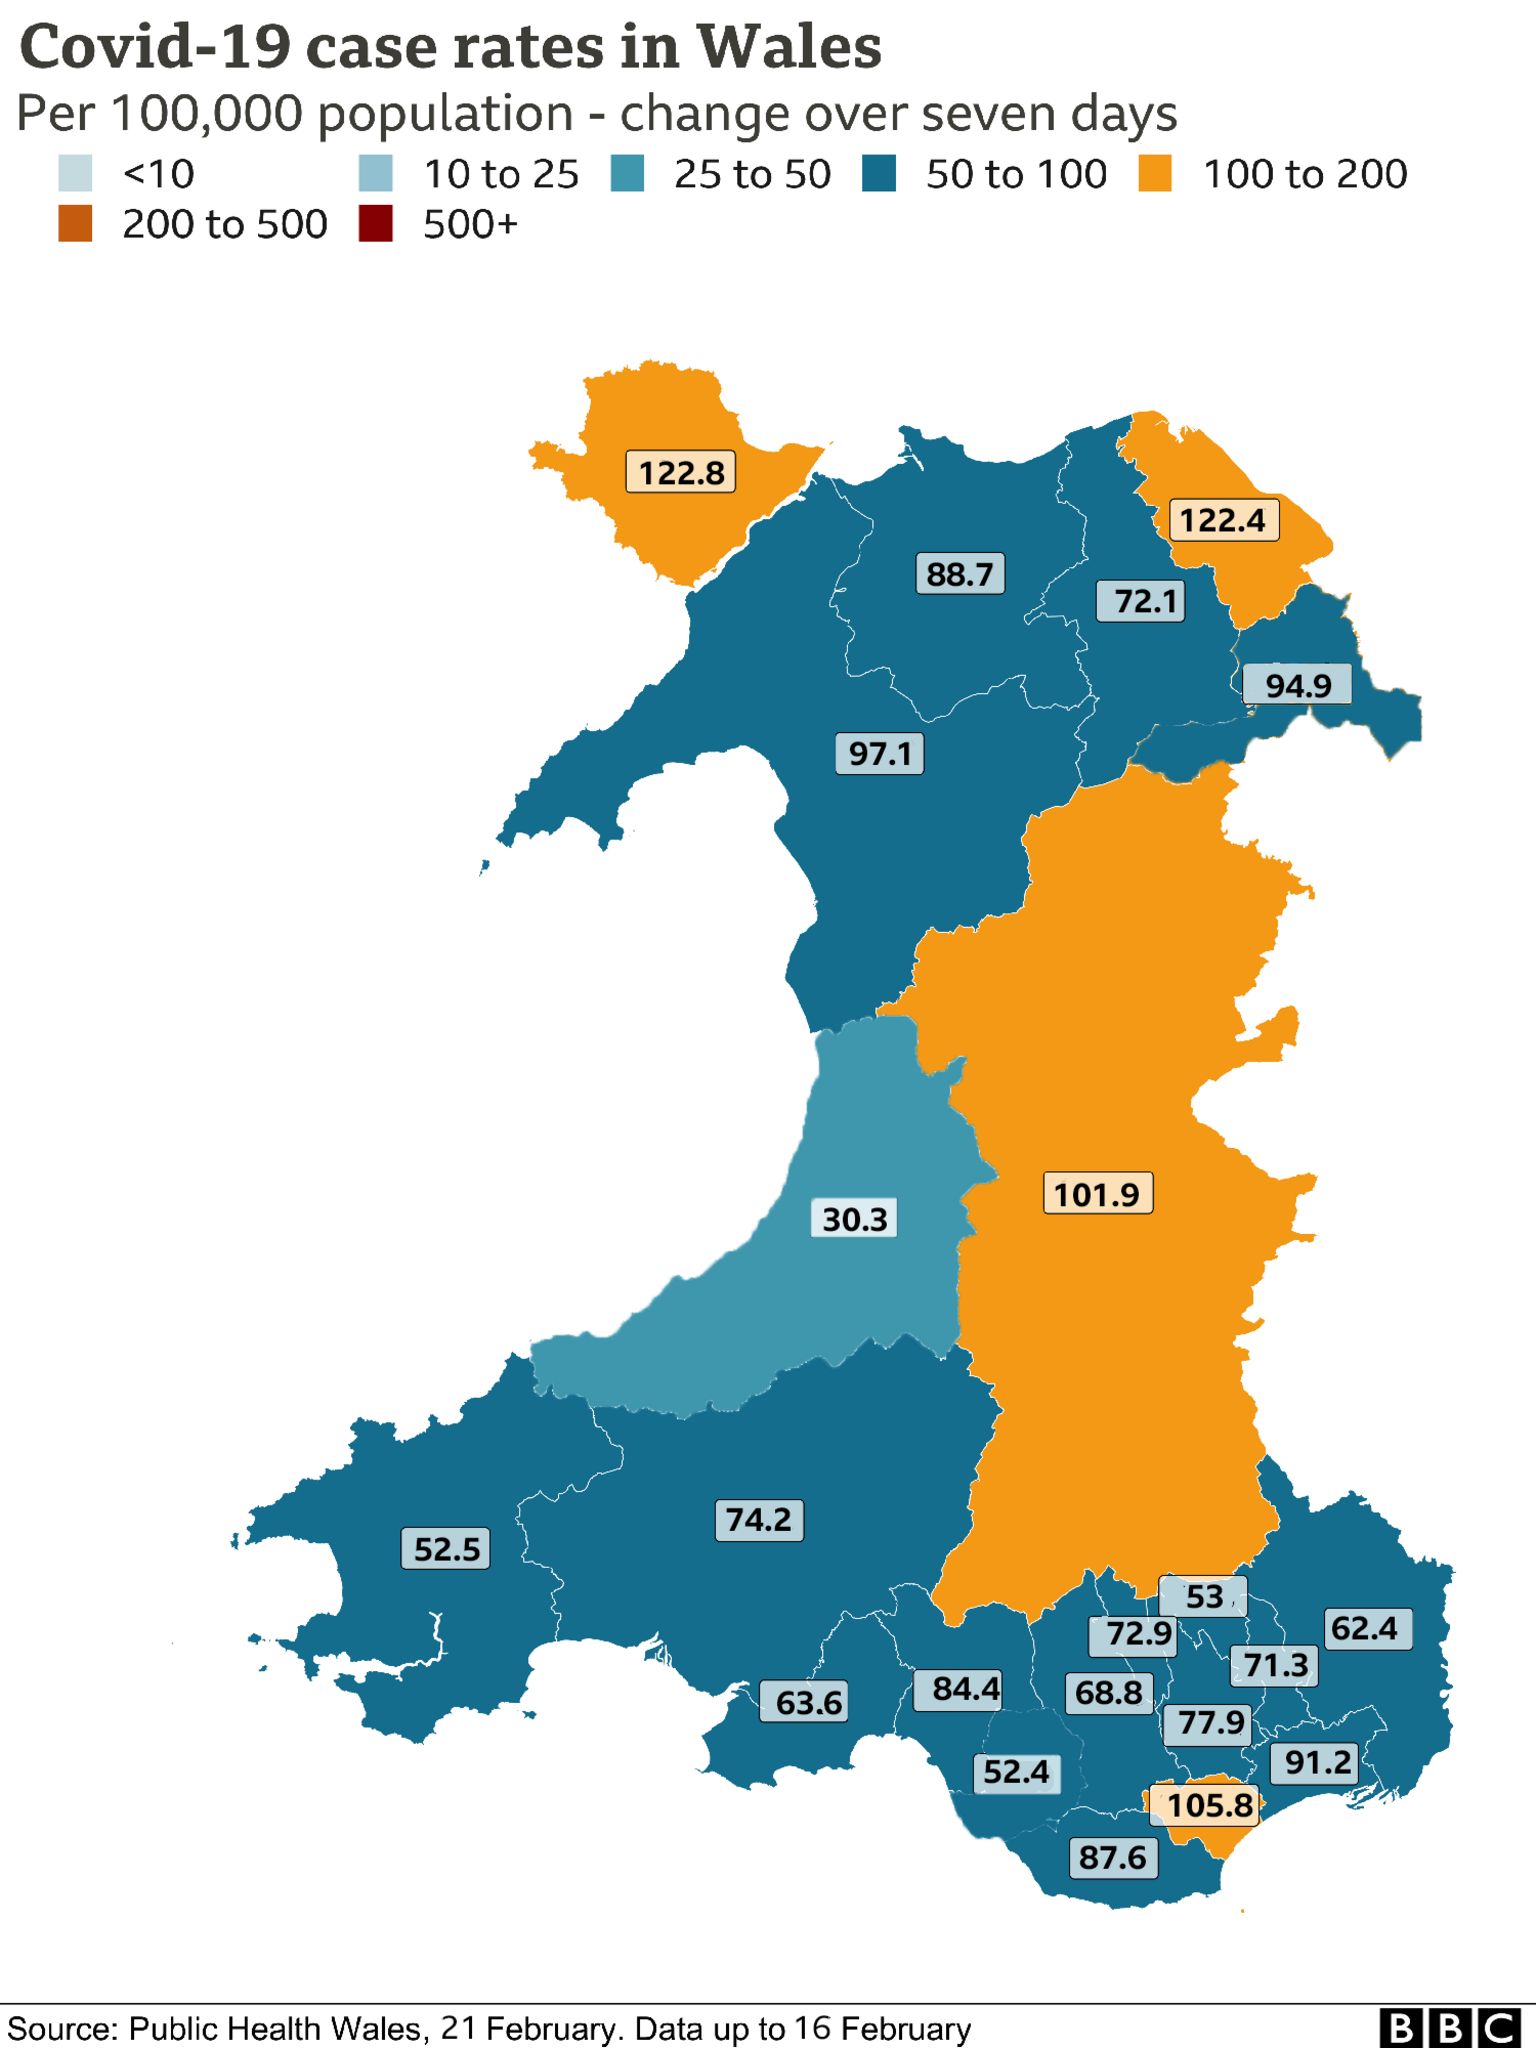 Map of Wales' Covid case rates